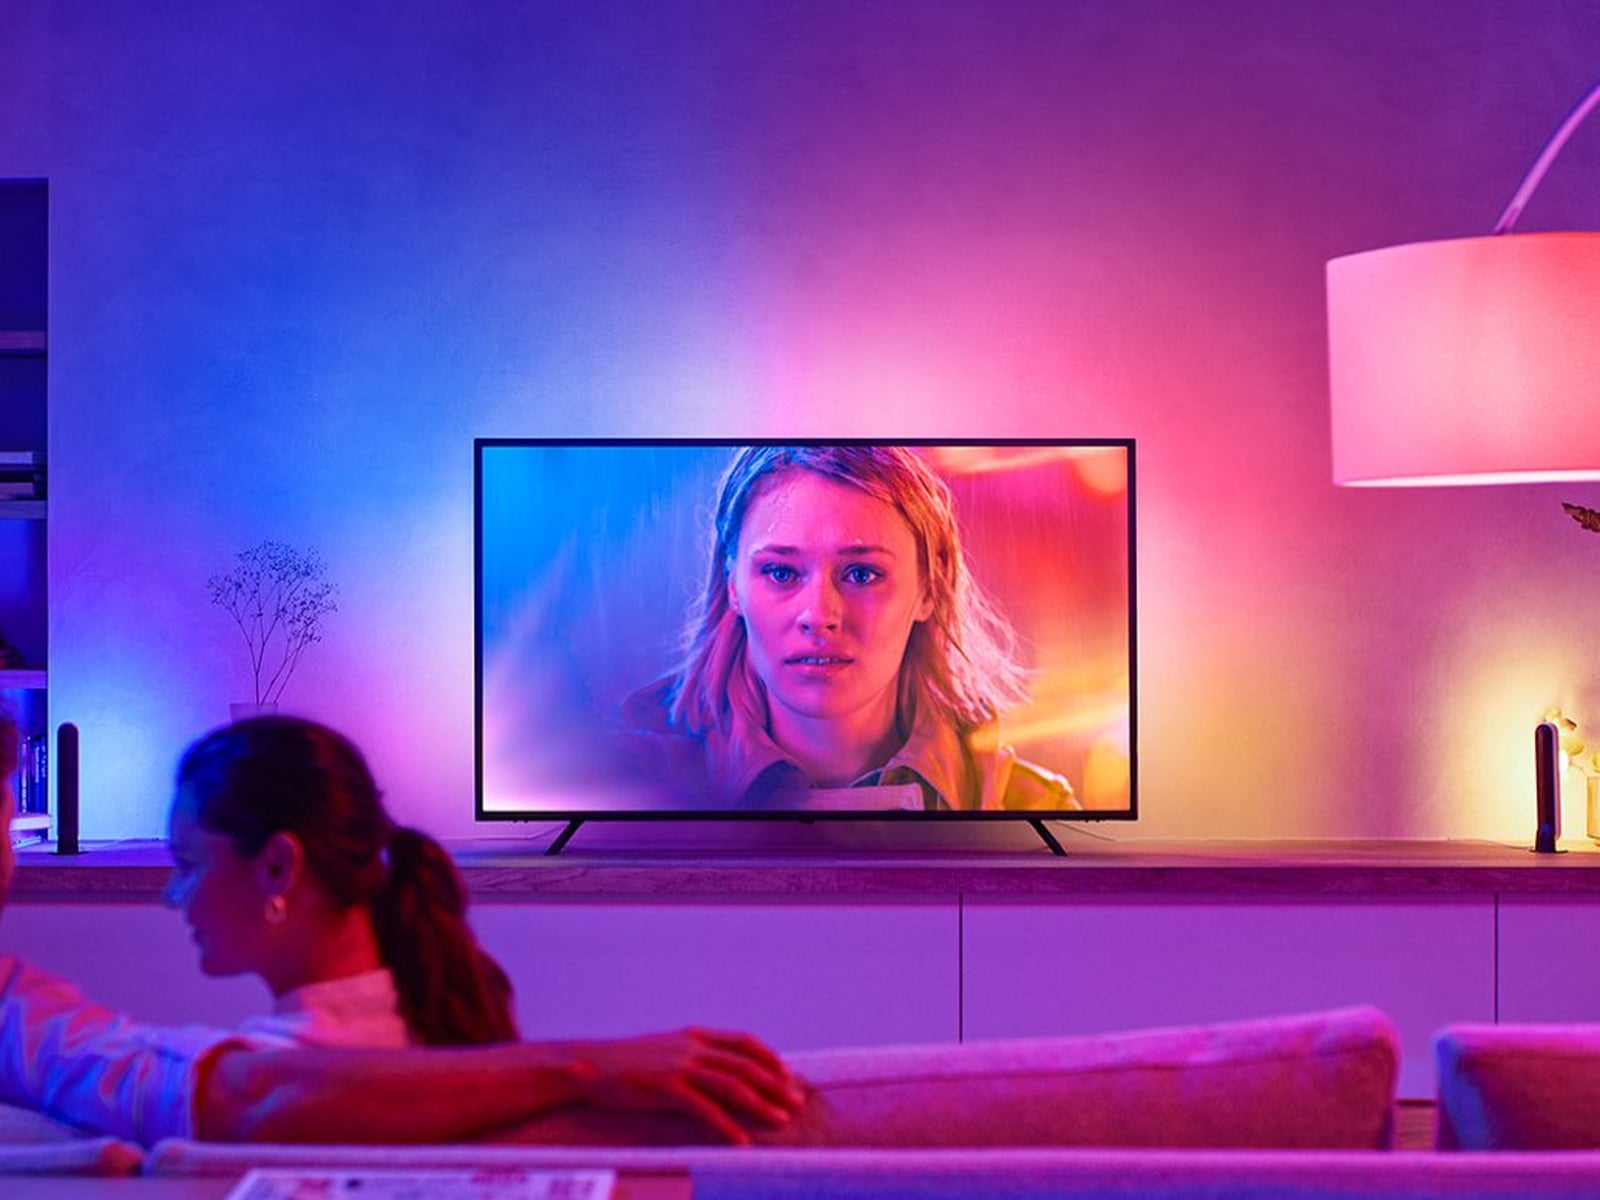 Philips Hue is getting a $130 app for TVs - The Verge